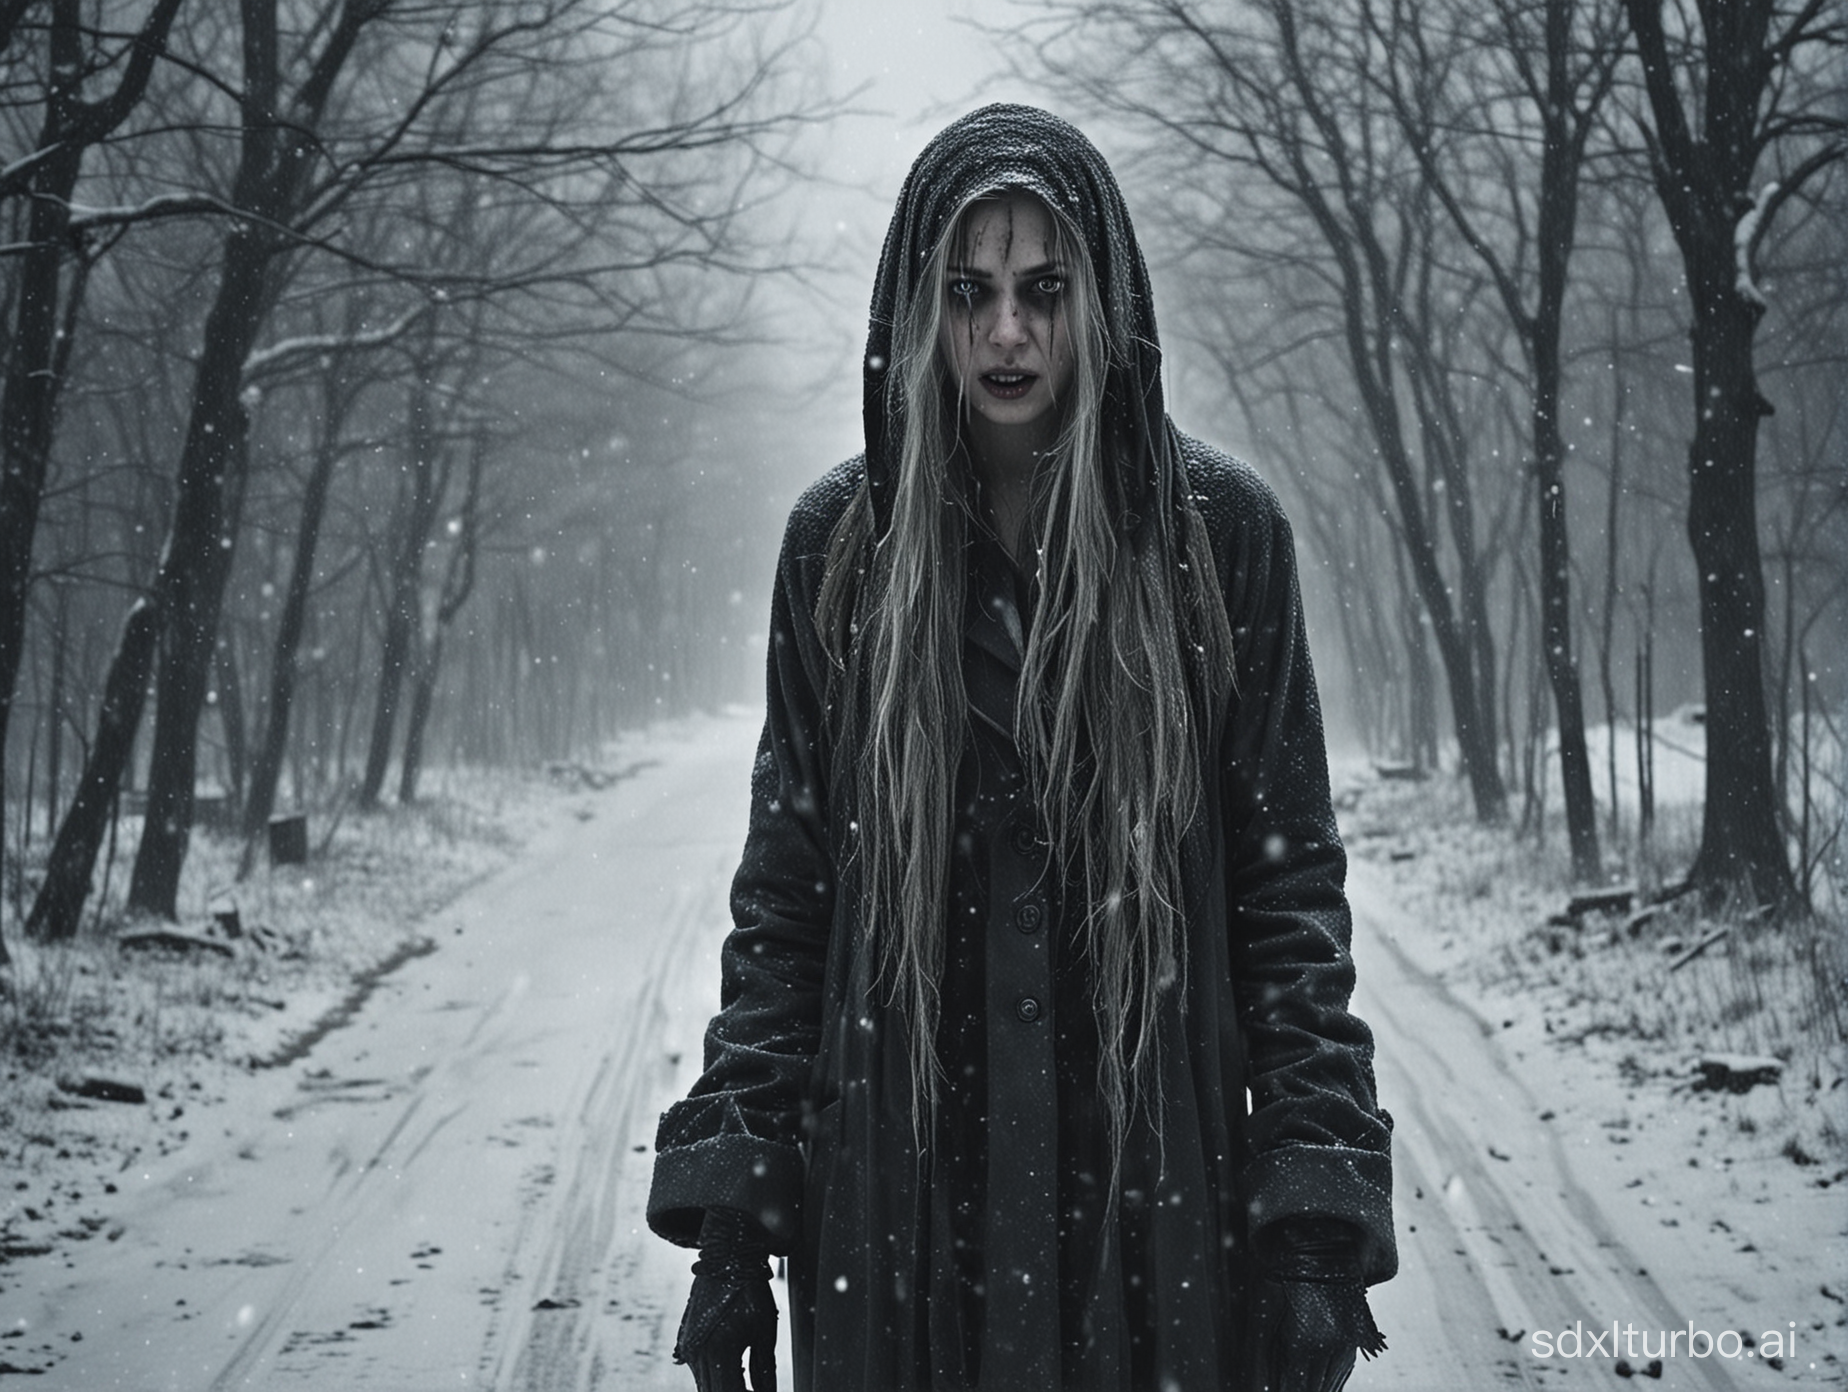 Create a high resolution, 16:9 aspect ratio, scary image that I can use as a thumbnail for my YouTube horror video "true snowstorm horror stories"? The image must be photorealistic, mysterious, feature creepy but realistic people, weird, horror, scary, atmospheric, catchy, must pop and catch the viewer's attention by sparking their curiosity and enticing to click on the video. 